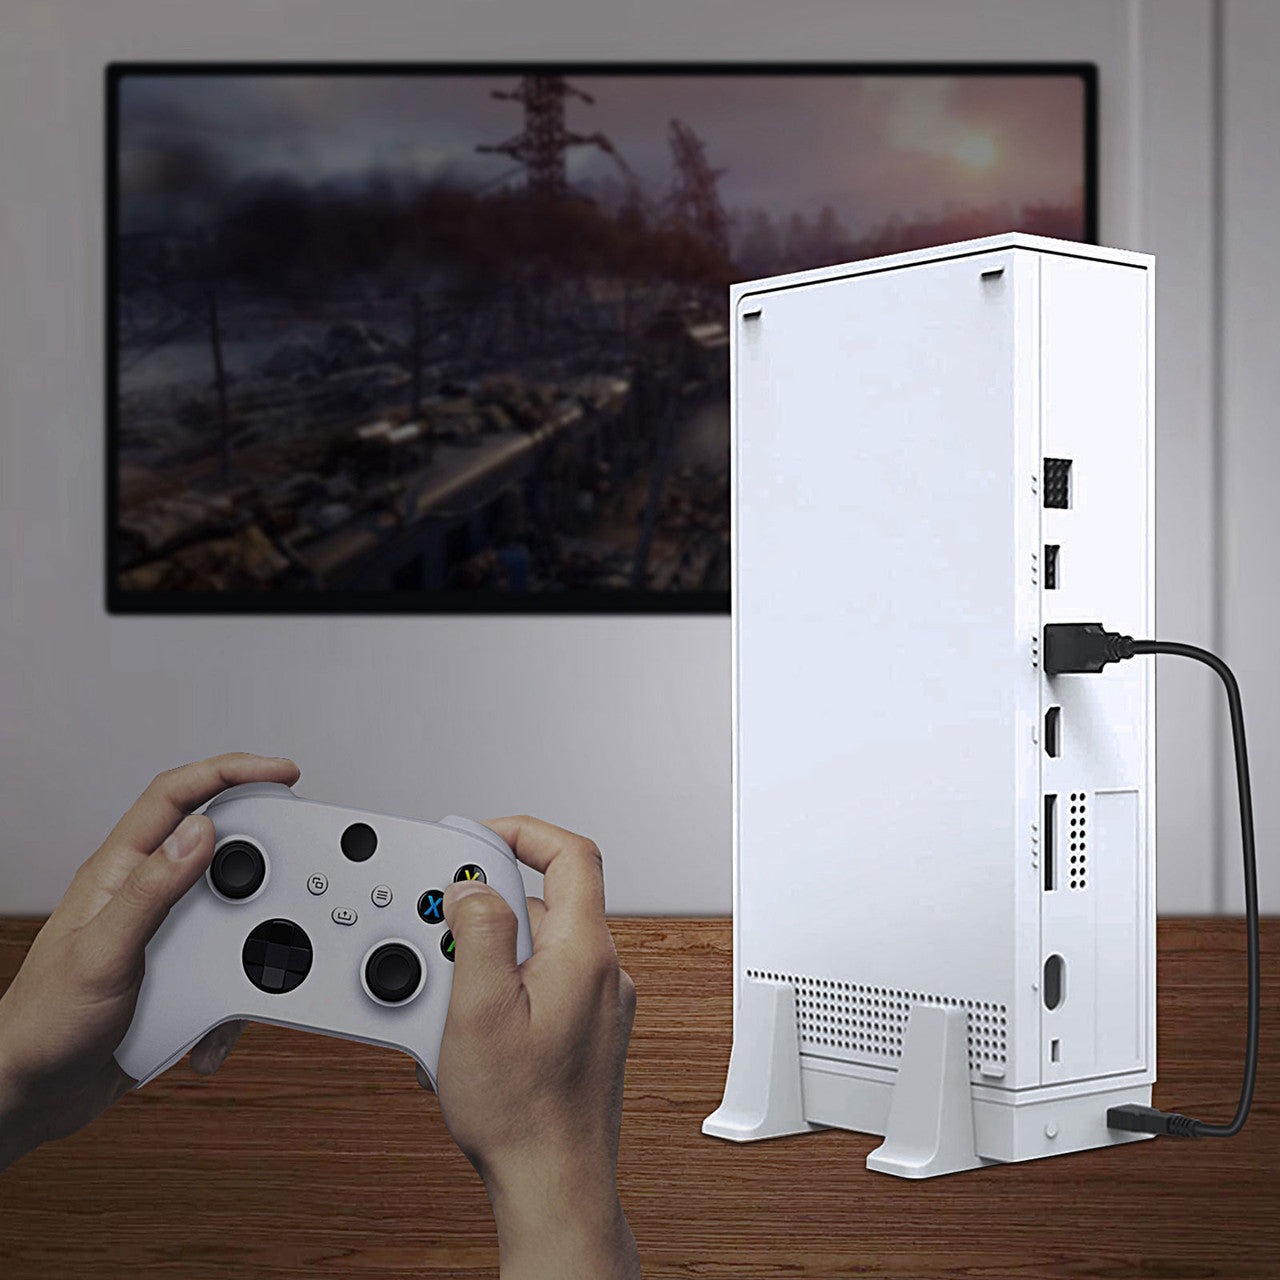 Vertical Cooling Fan Stand with Dual USB Ports for Xbox Series S Console